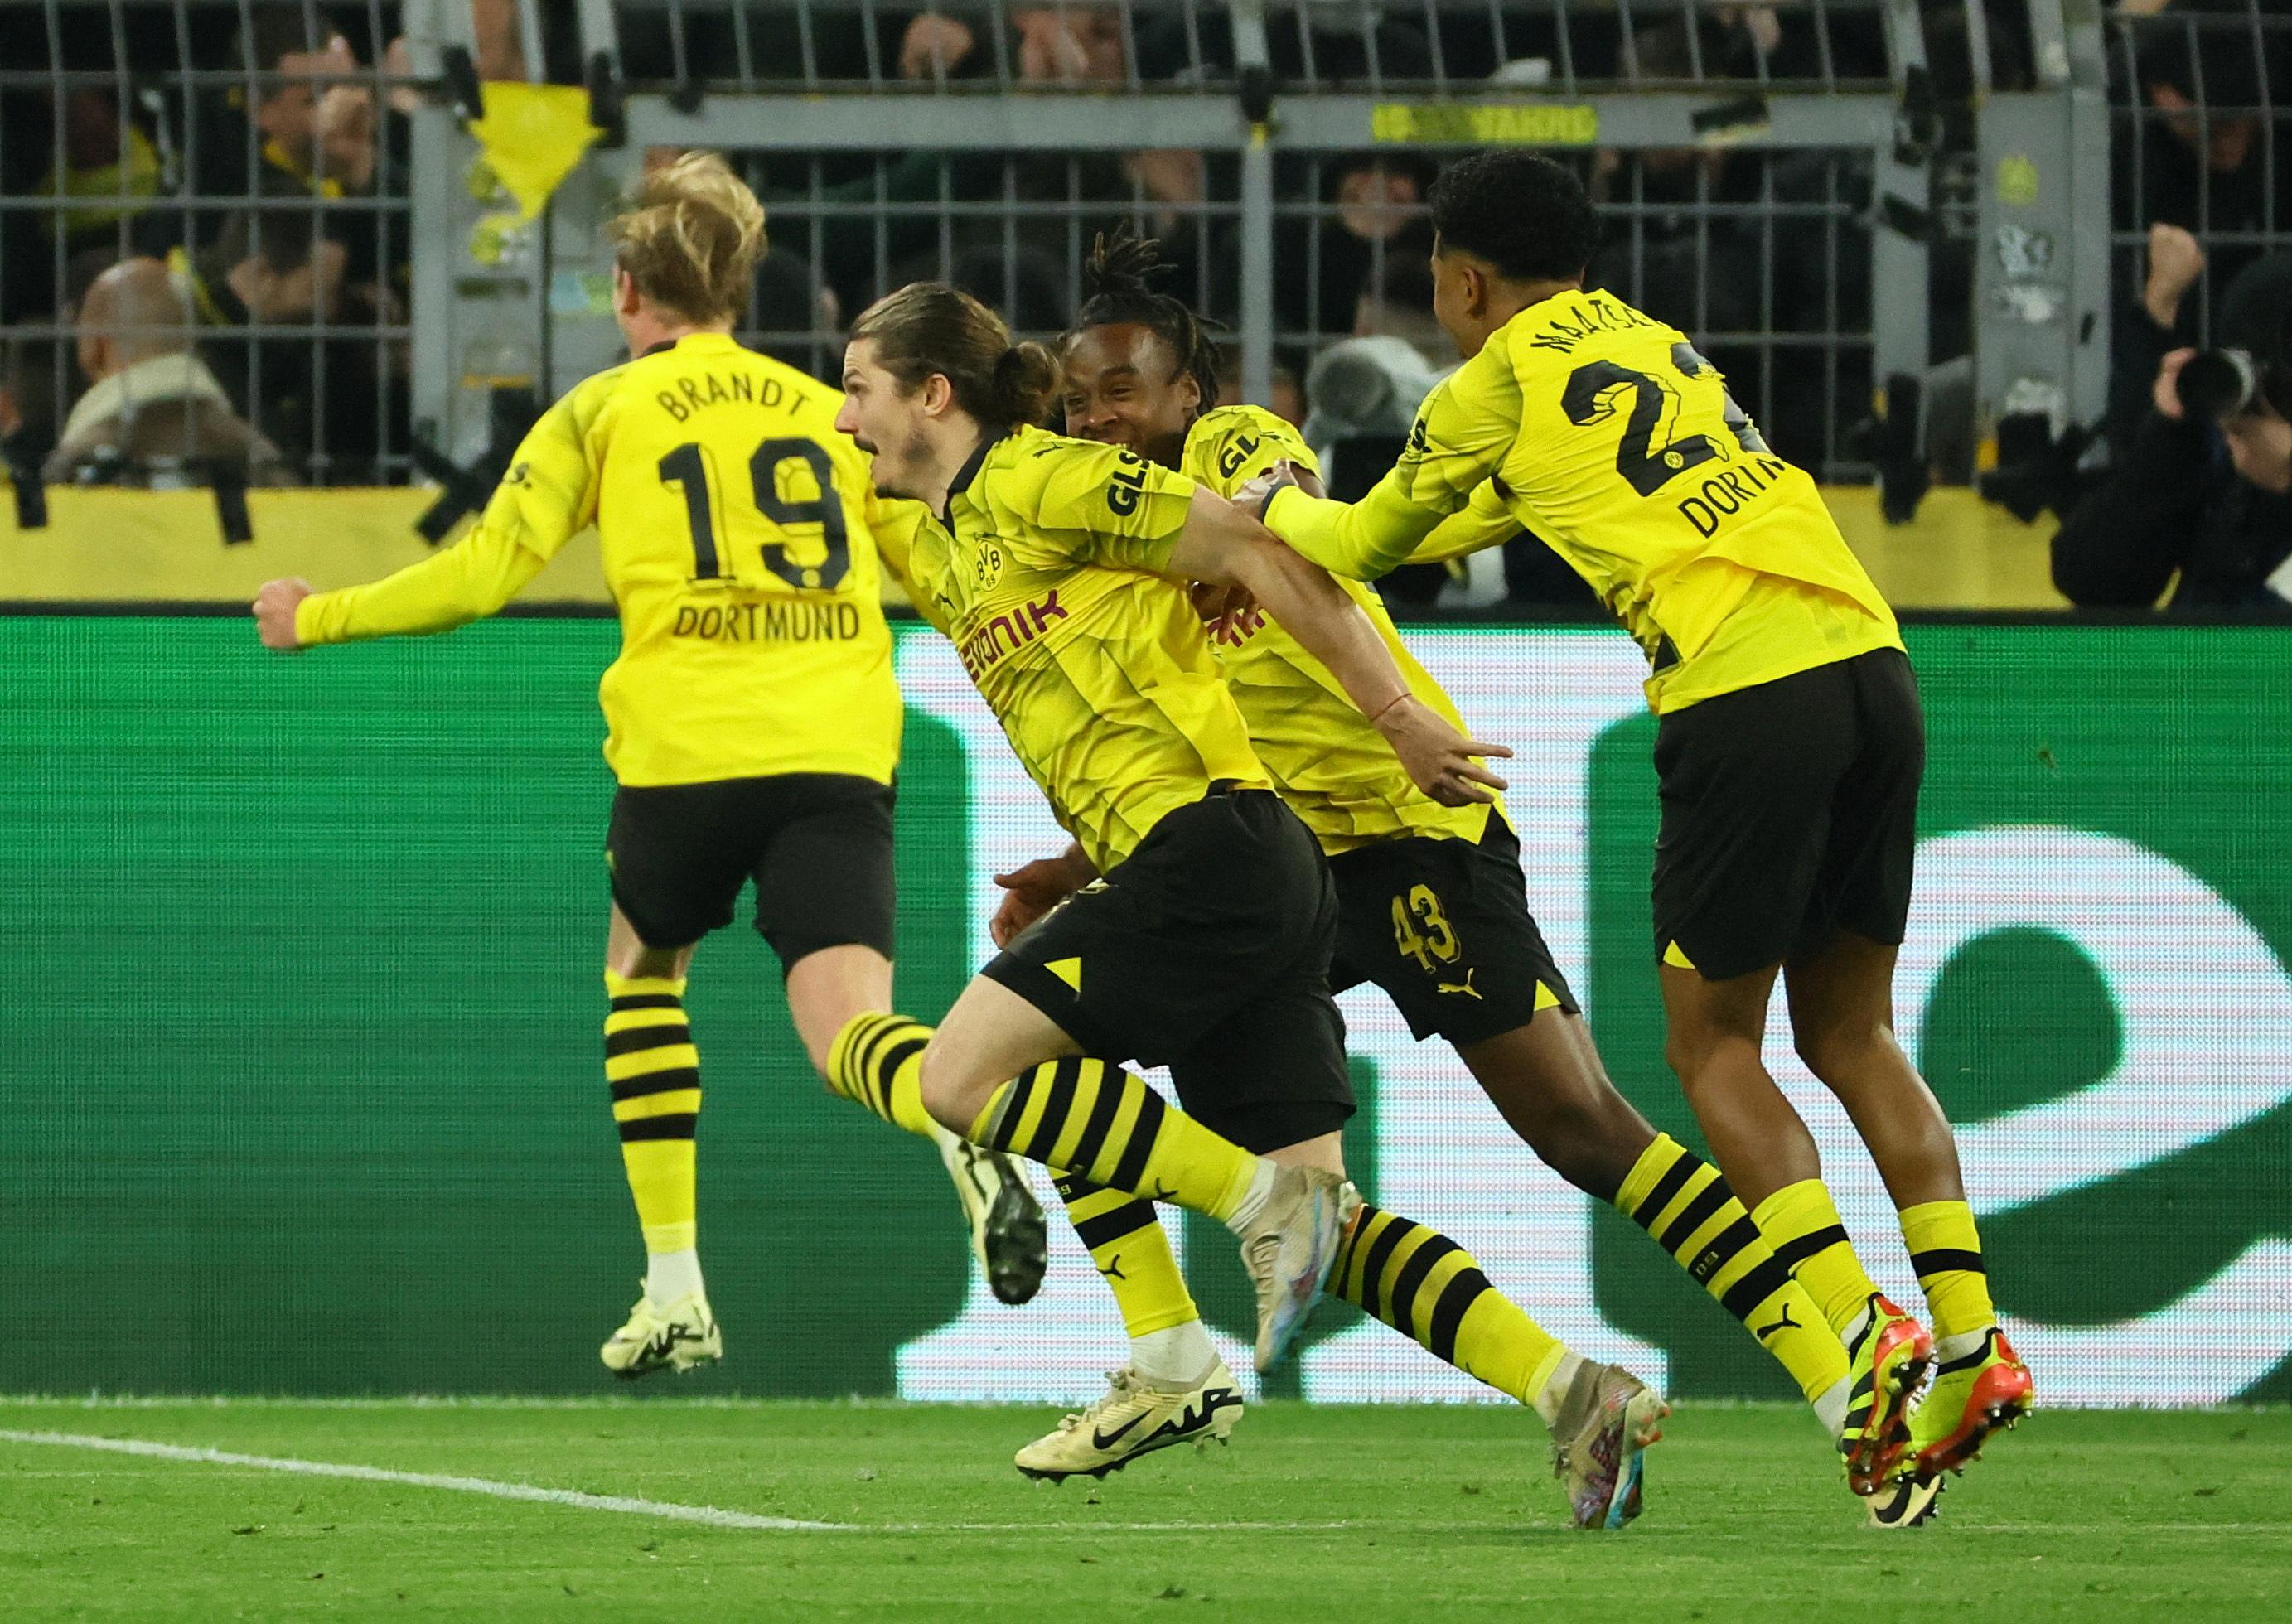 Champions League: in a crazy match, Borussia Dortmund overthrow Atletico and qualify